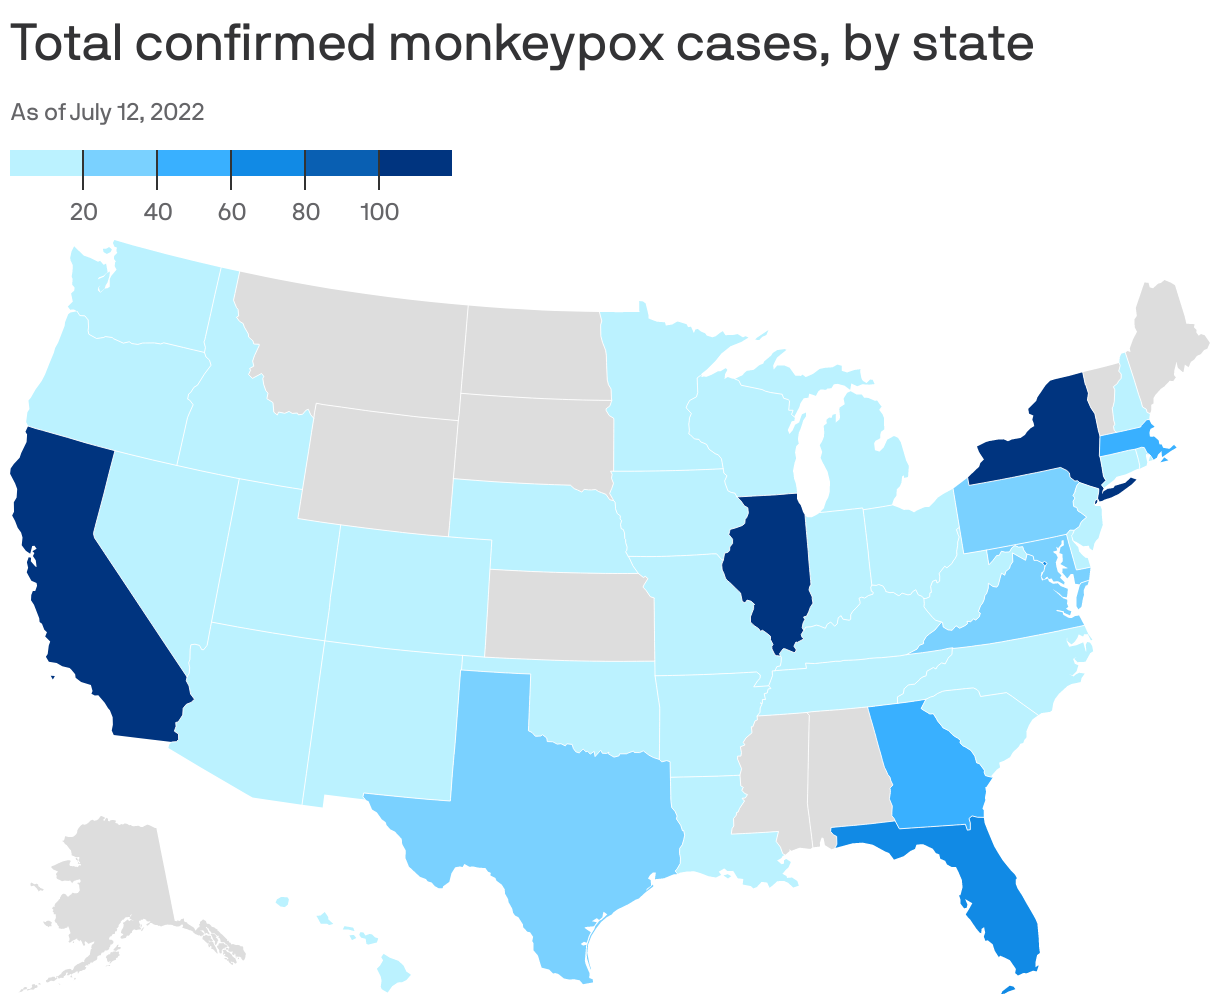 Total confirmed monkeypox cases, by state